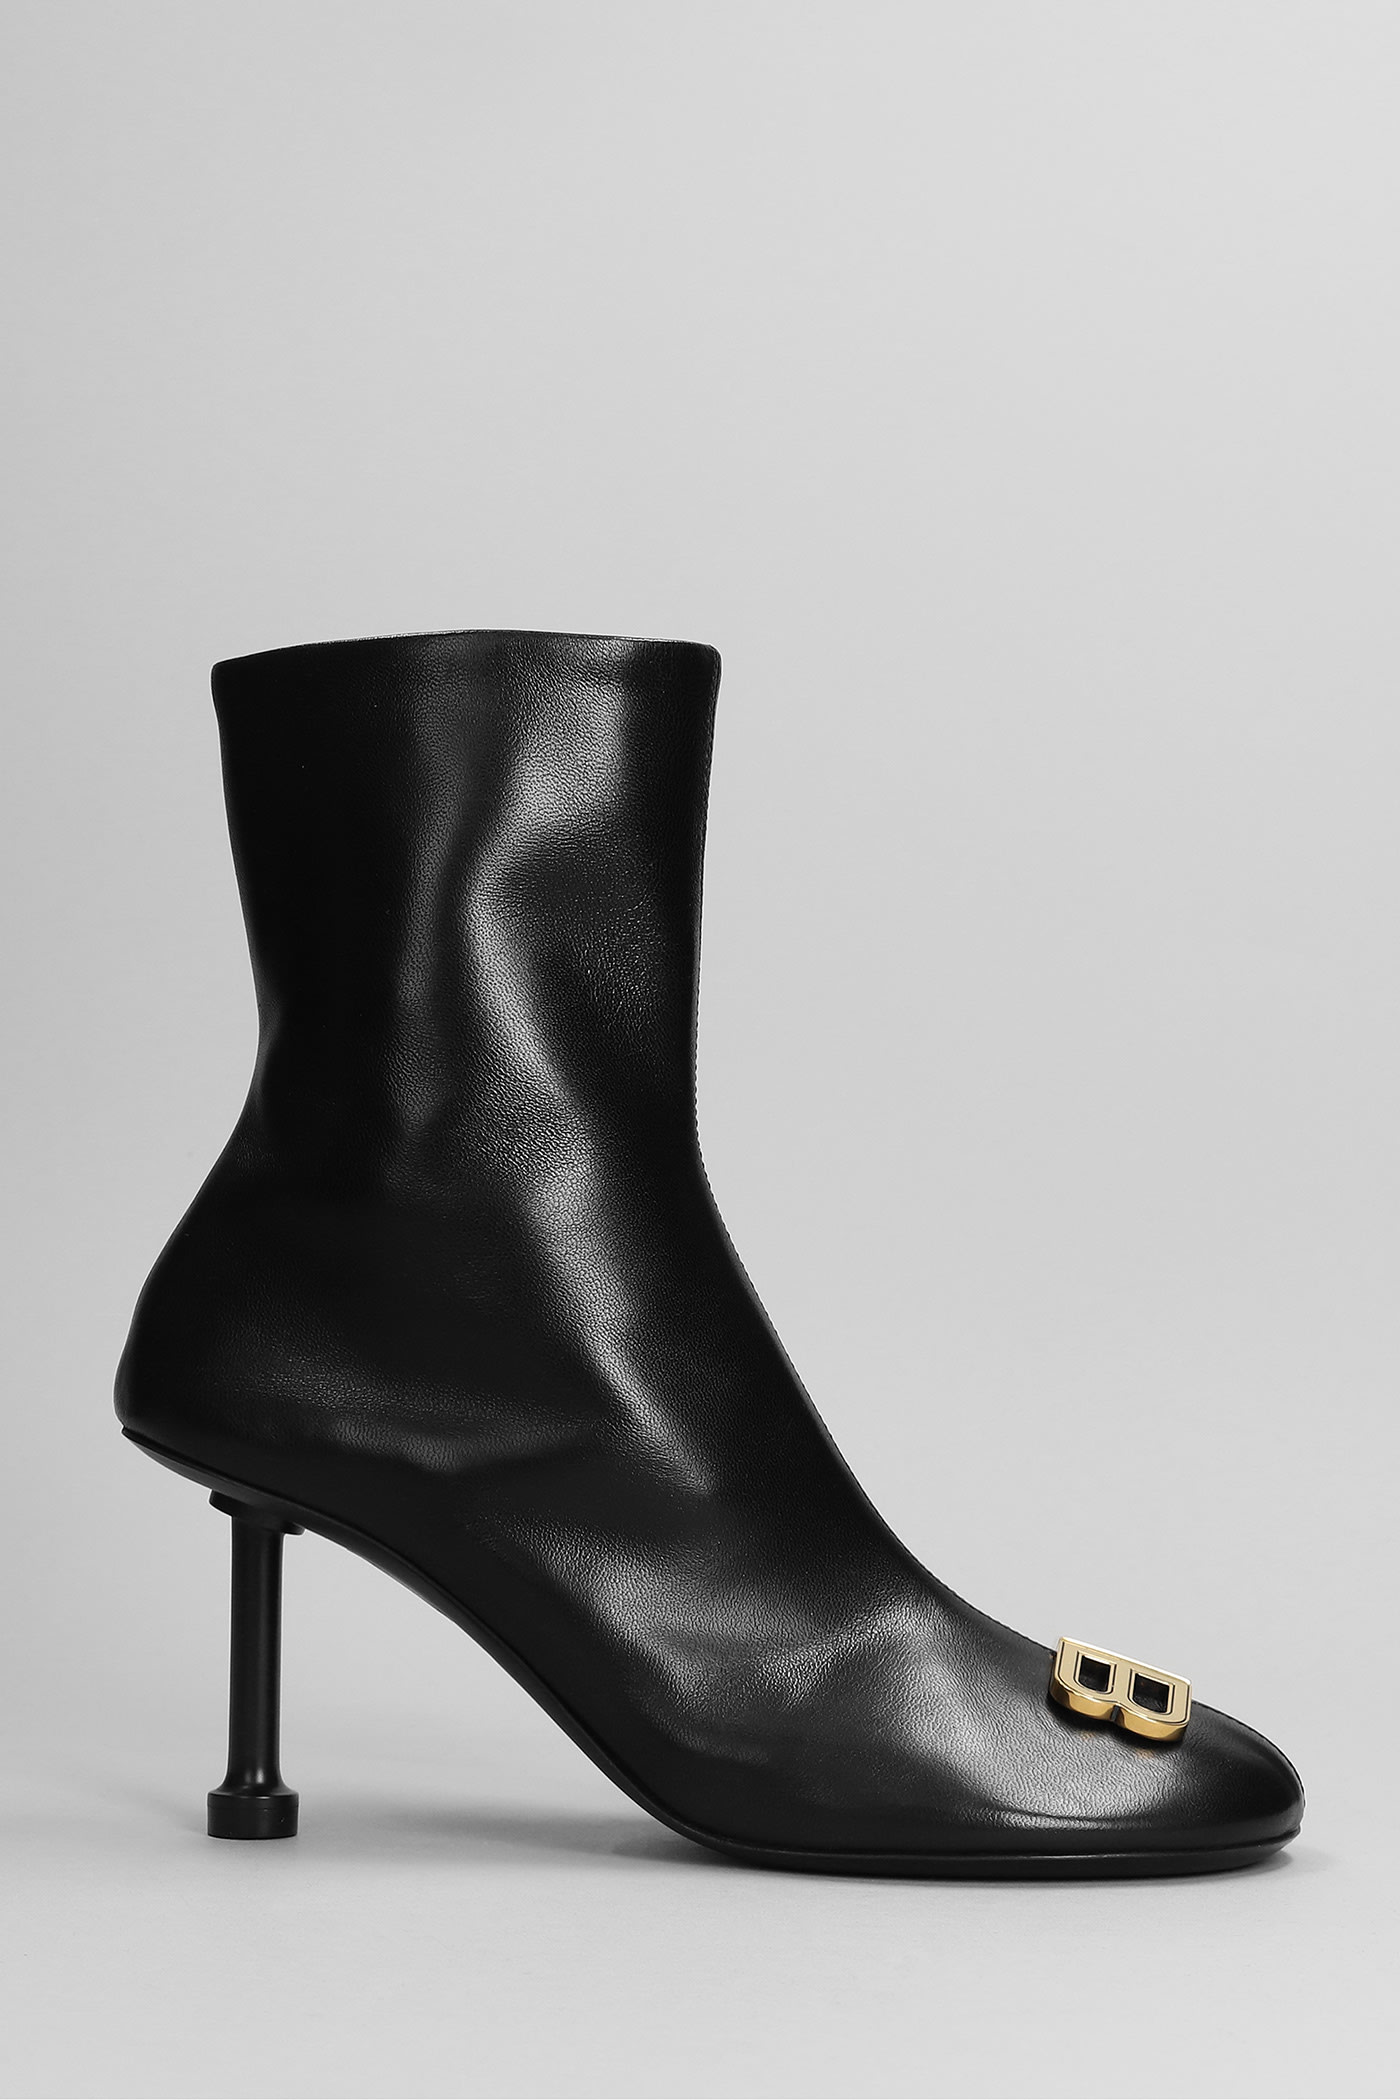 BALENCIAGA HIGH HEELS ANKLE BOOTS IN BLACK LEATHER